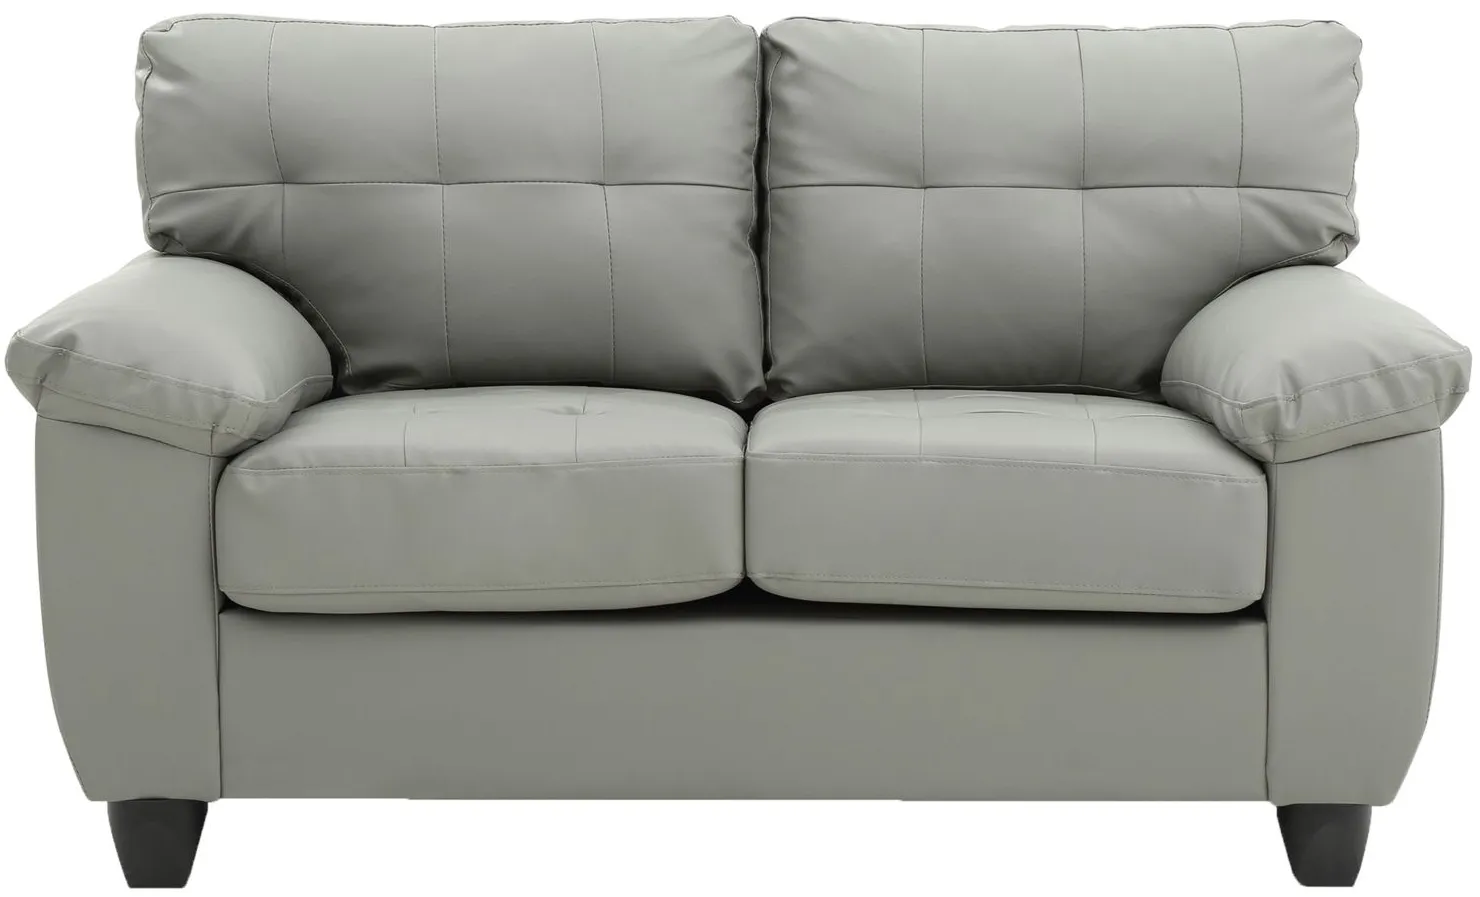 Gallant Loveseat in Gray by Glory Furniture